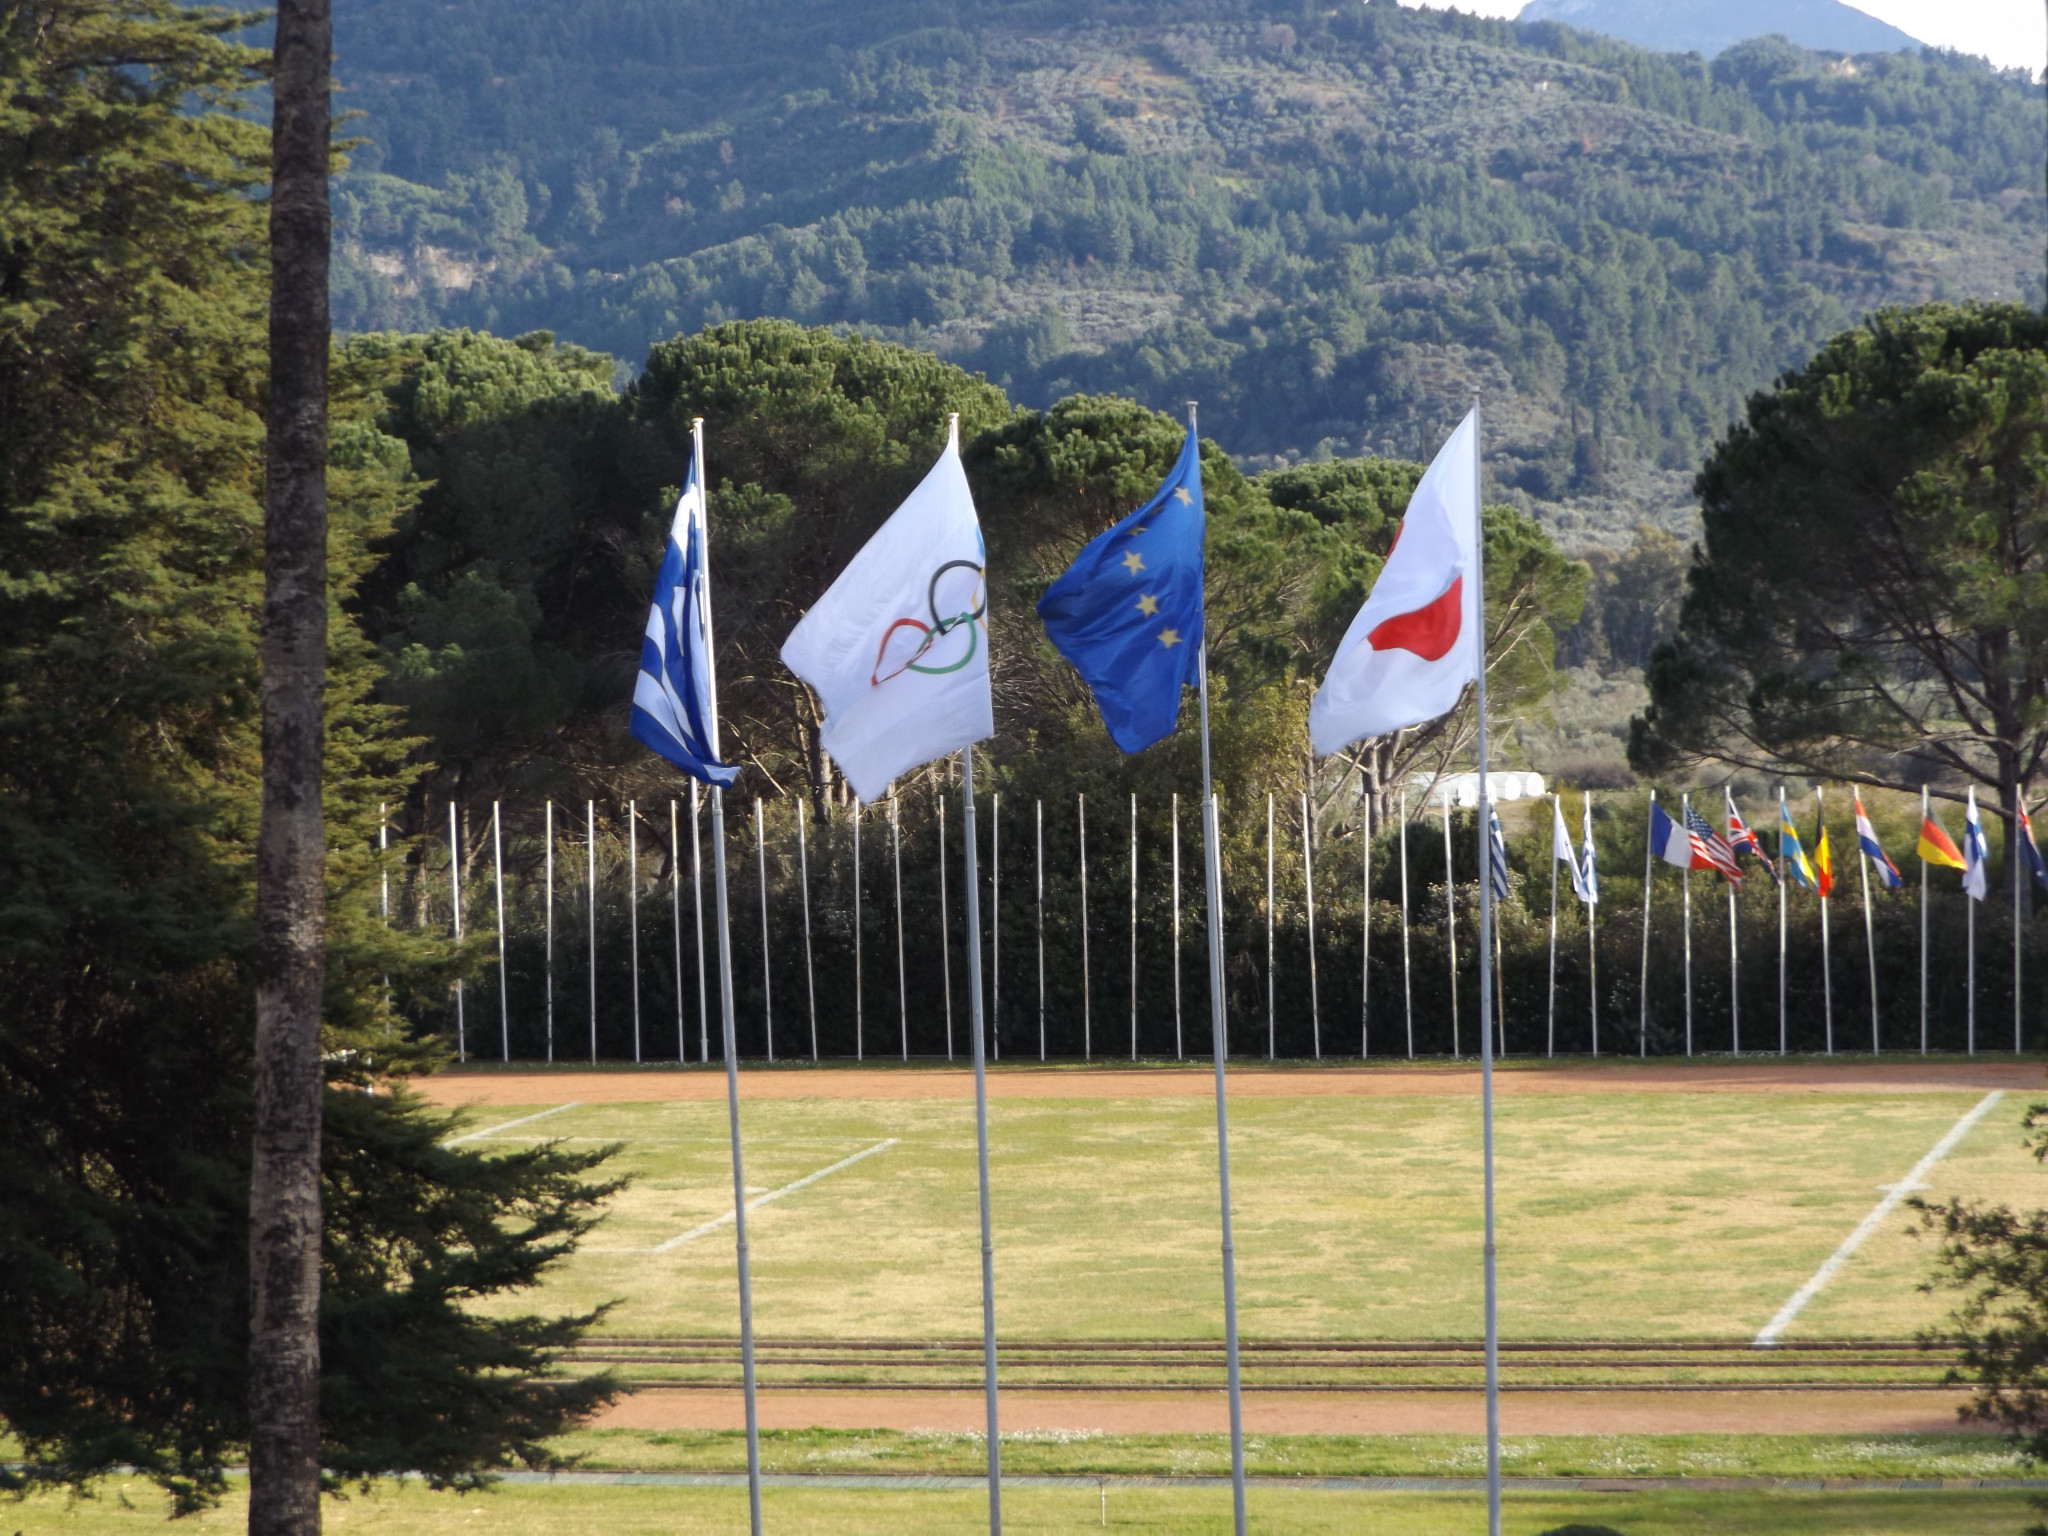 The sports field at the International Olympic Academy will be modernised as part of the facelift ©Philip Barker